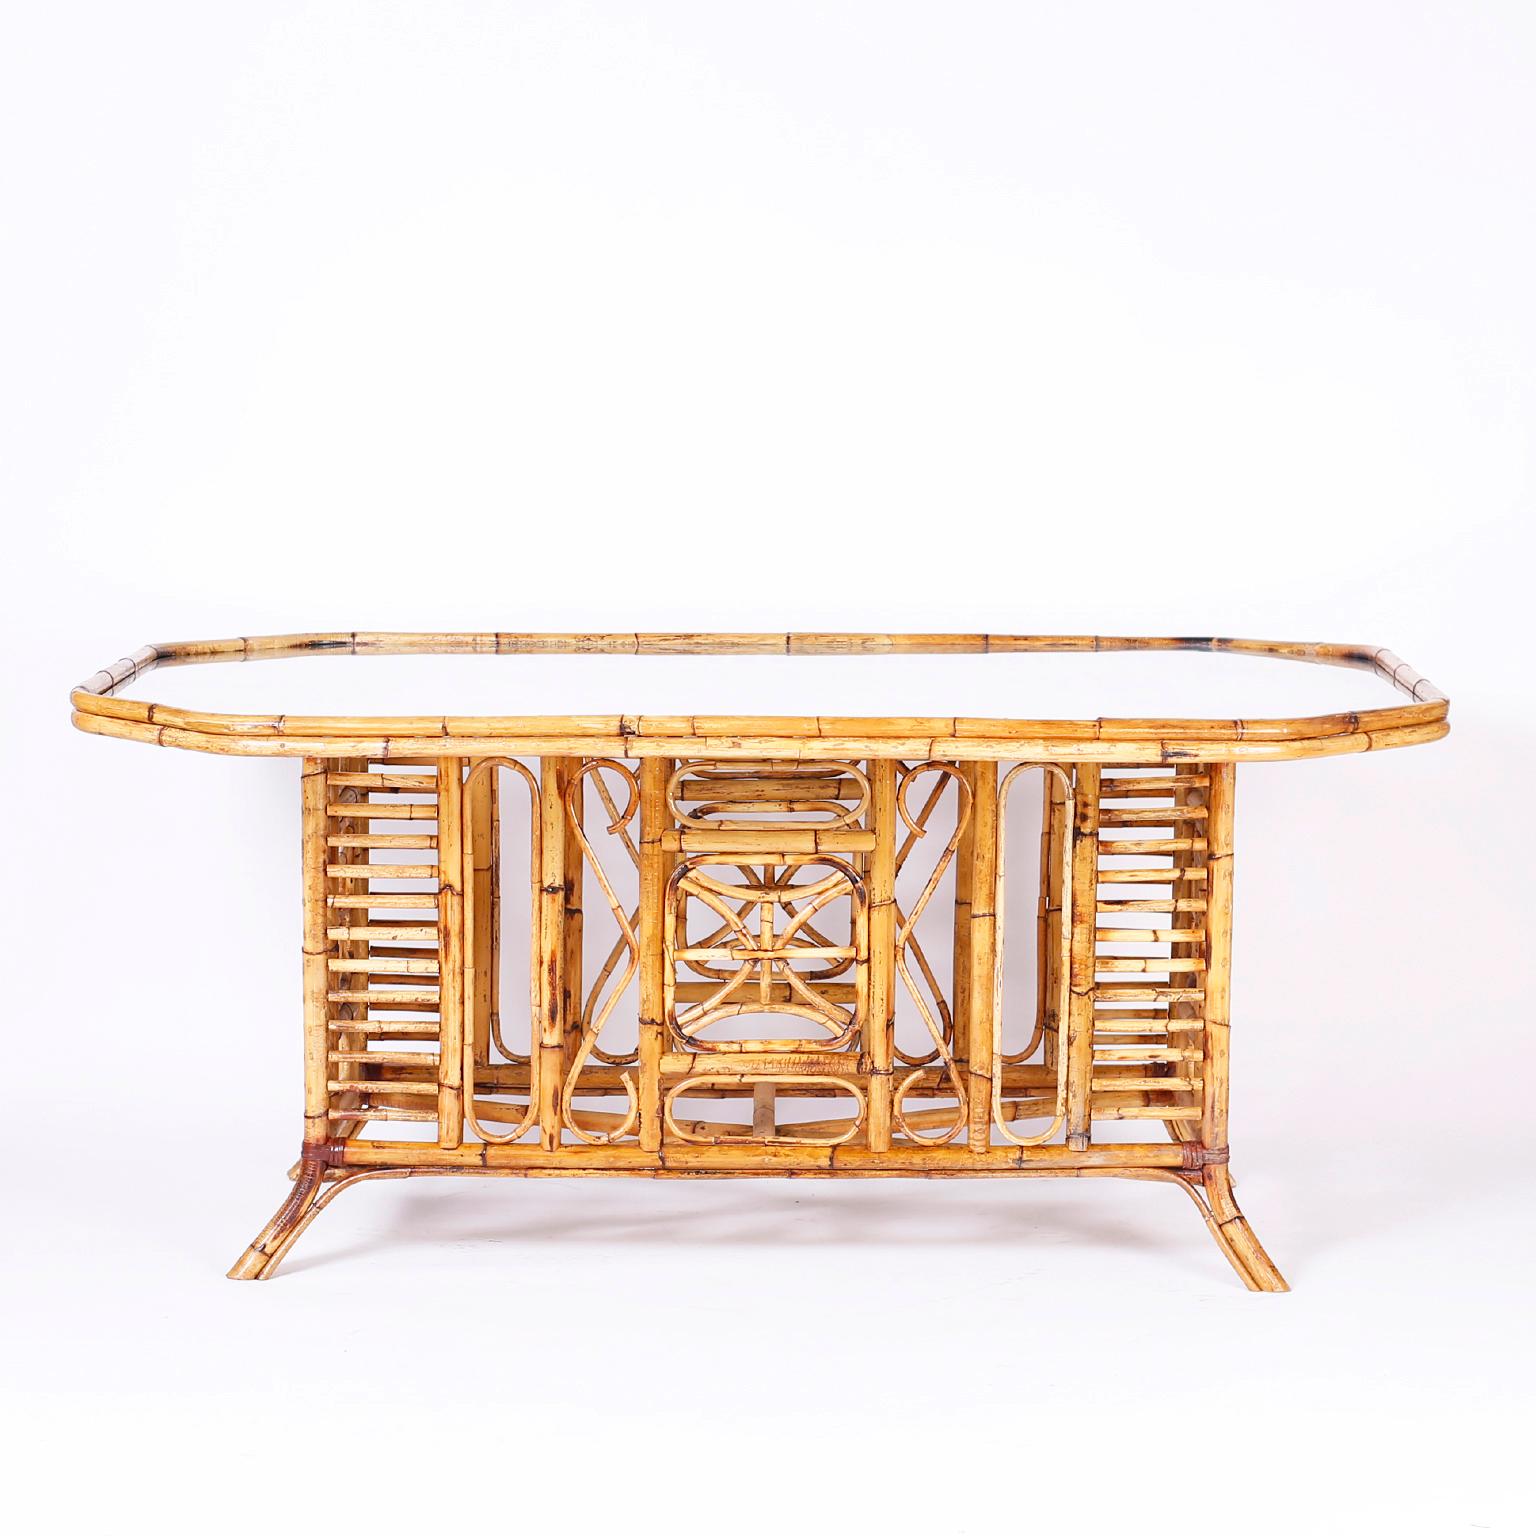 British colonial style bamboo glass top dining table with a strong Brighton Pavilion influence highlighted with burnt and bent bamboo techniques.